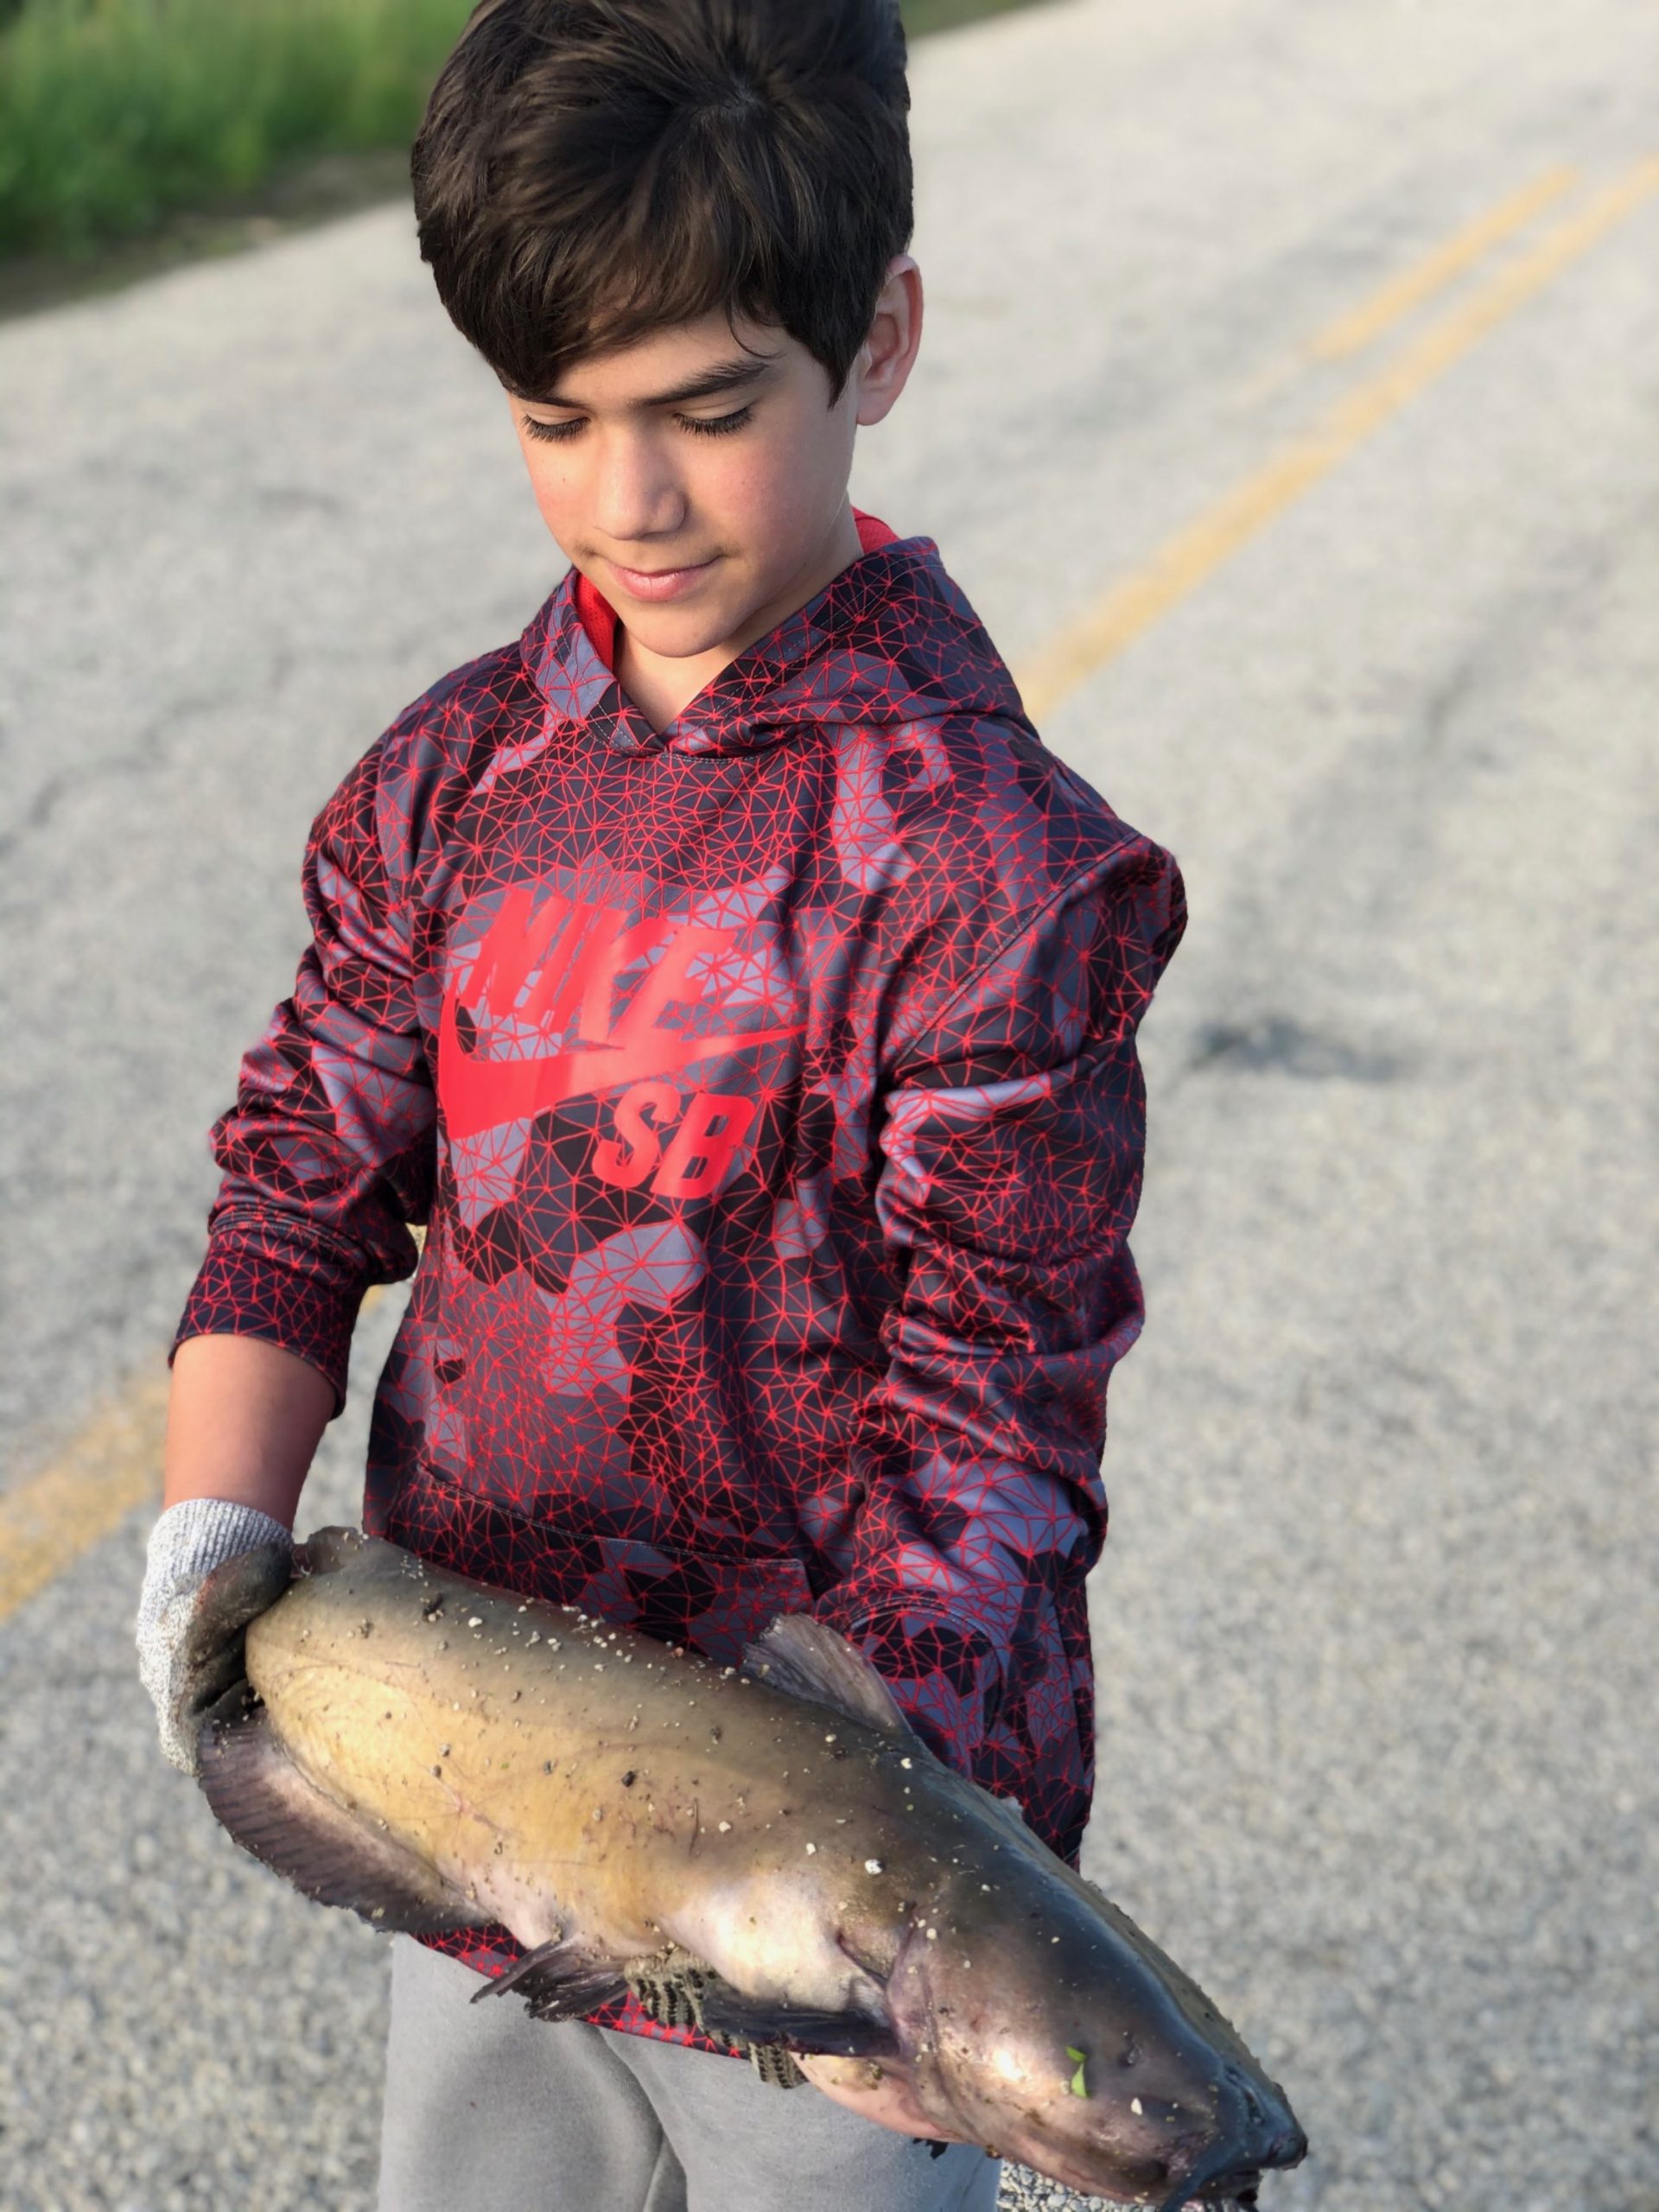 Maumee river report-. 29 may 2020